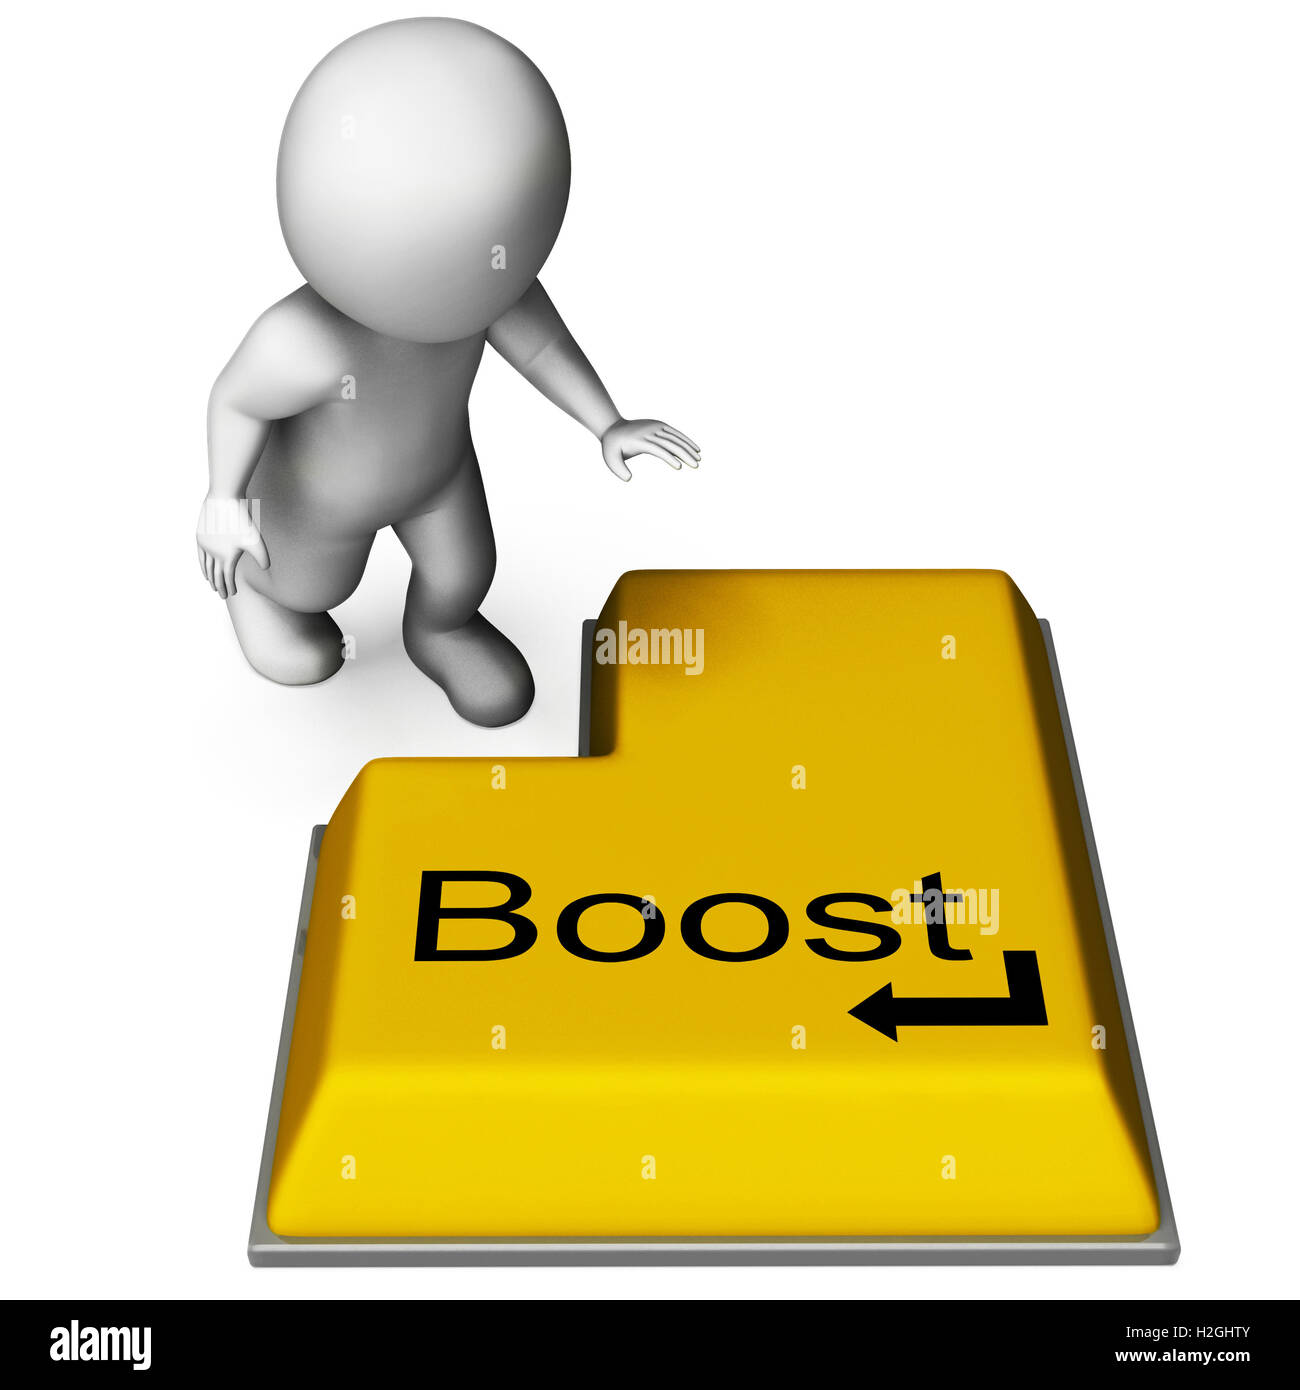 Boost Key Means Upgrade Or Improvement On Computer Stock Photo